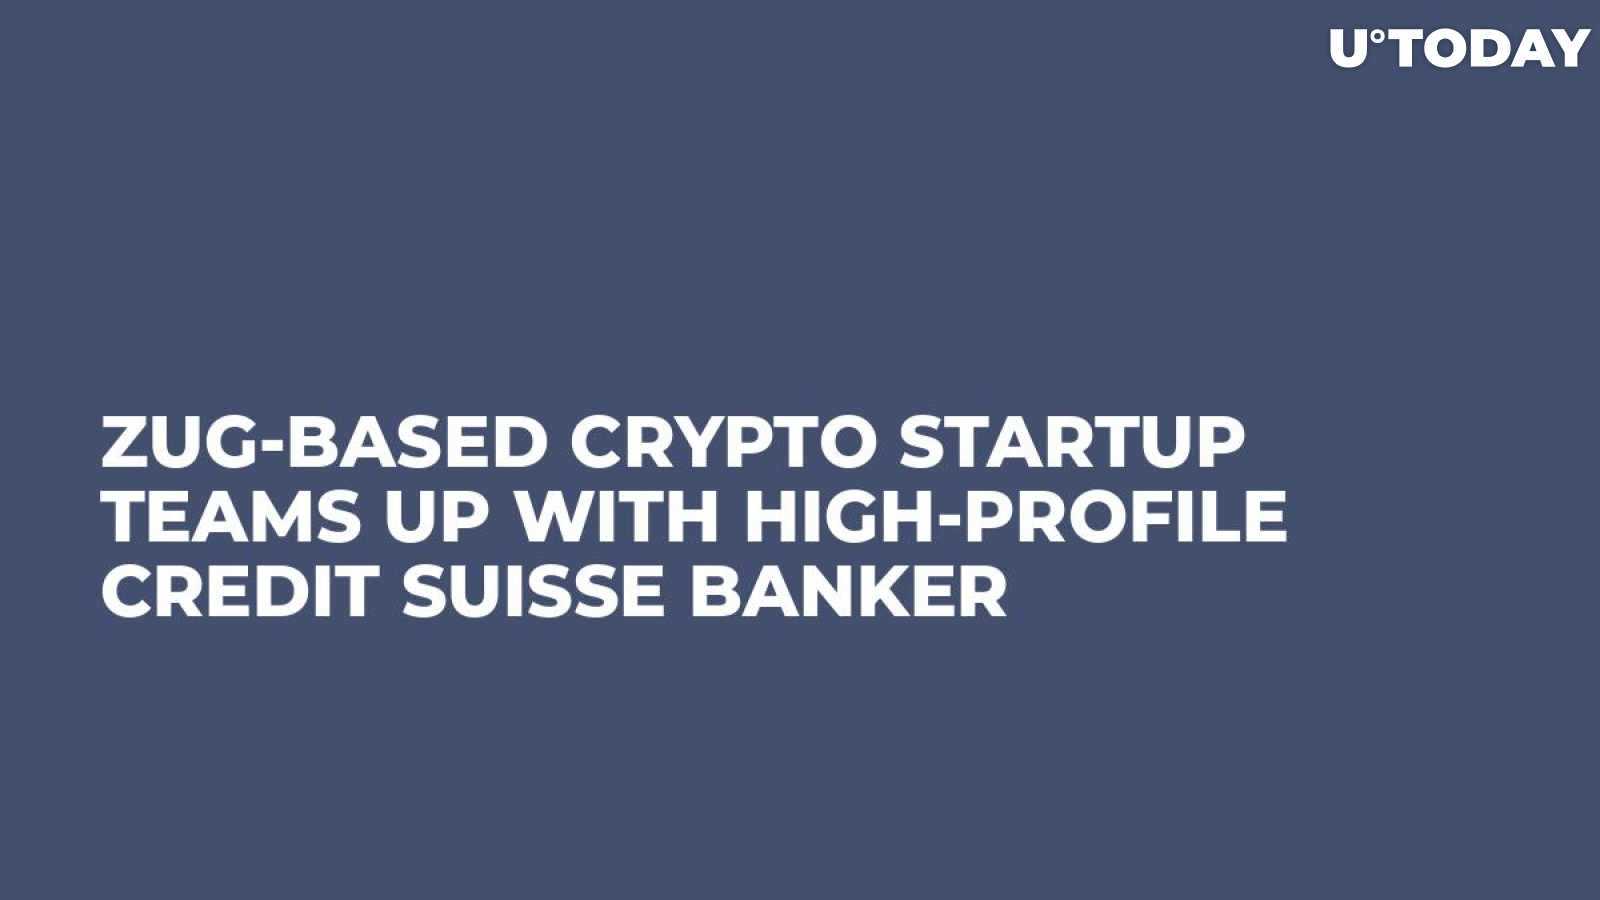 Zug-Based Crypto Startup Teams Up With High-Profile Credit Suisse Banker